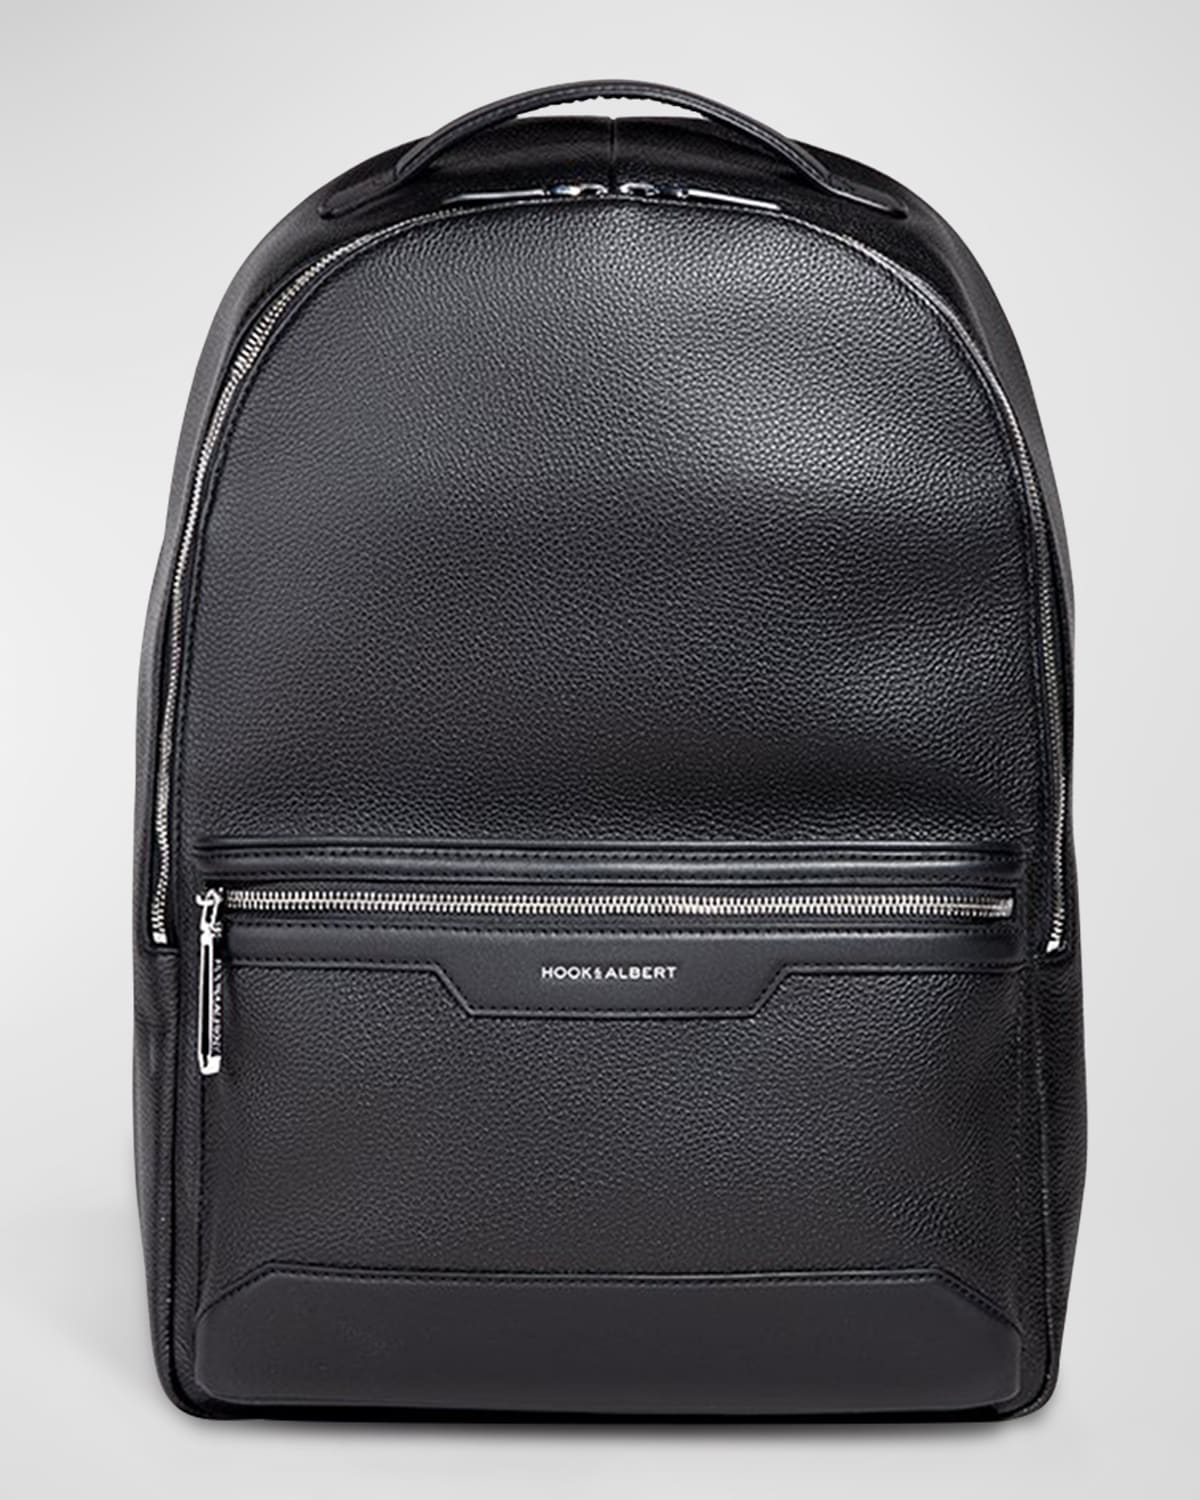 Men's Leather Backpack with Padded Laptop Compartment